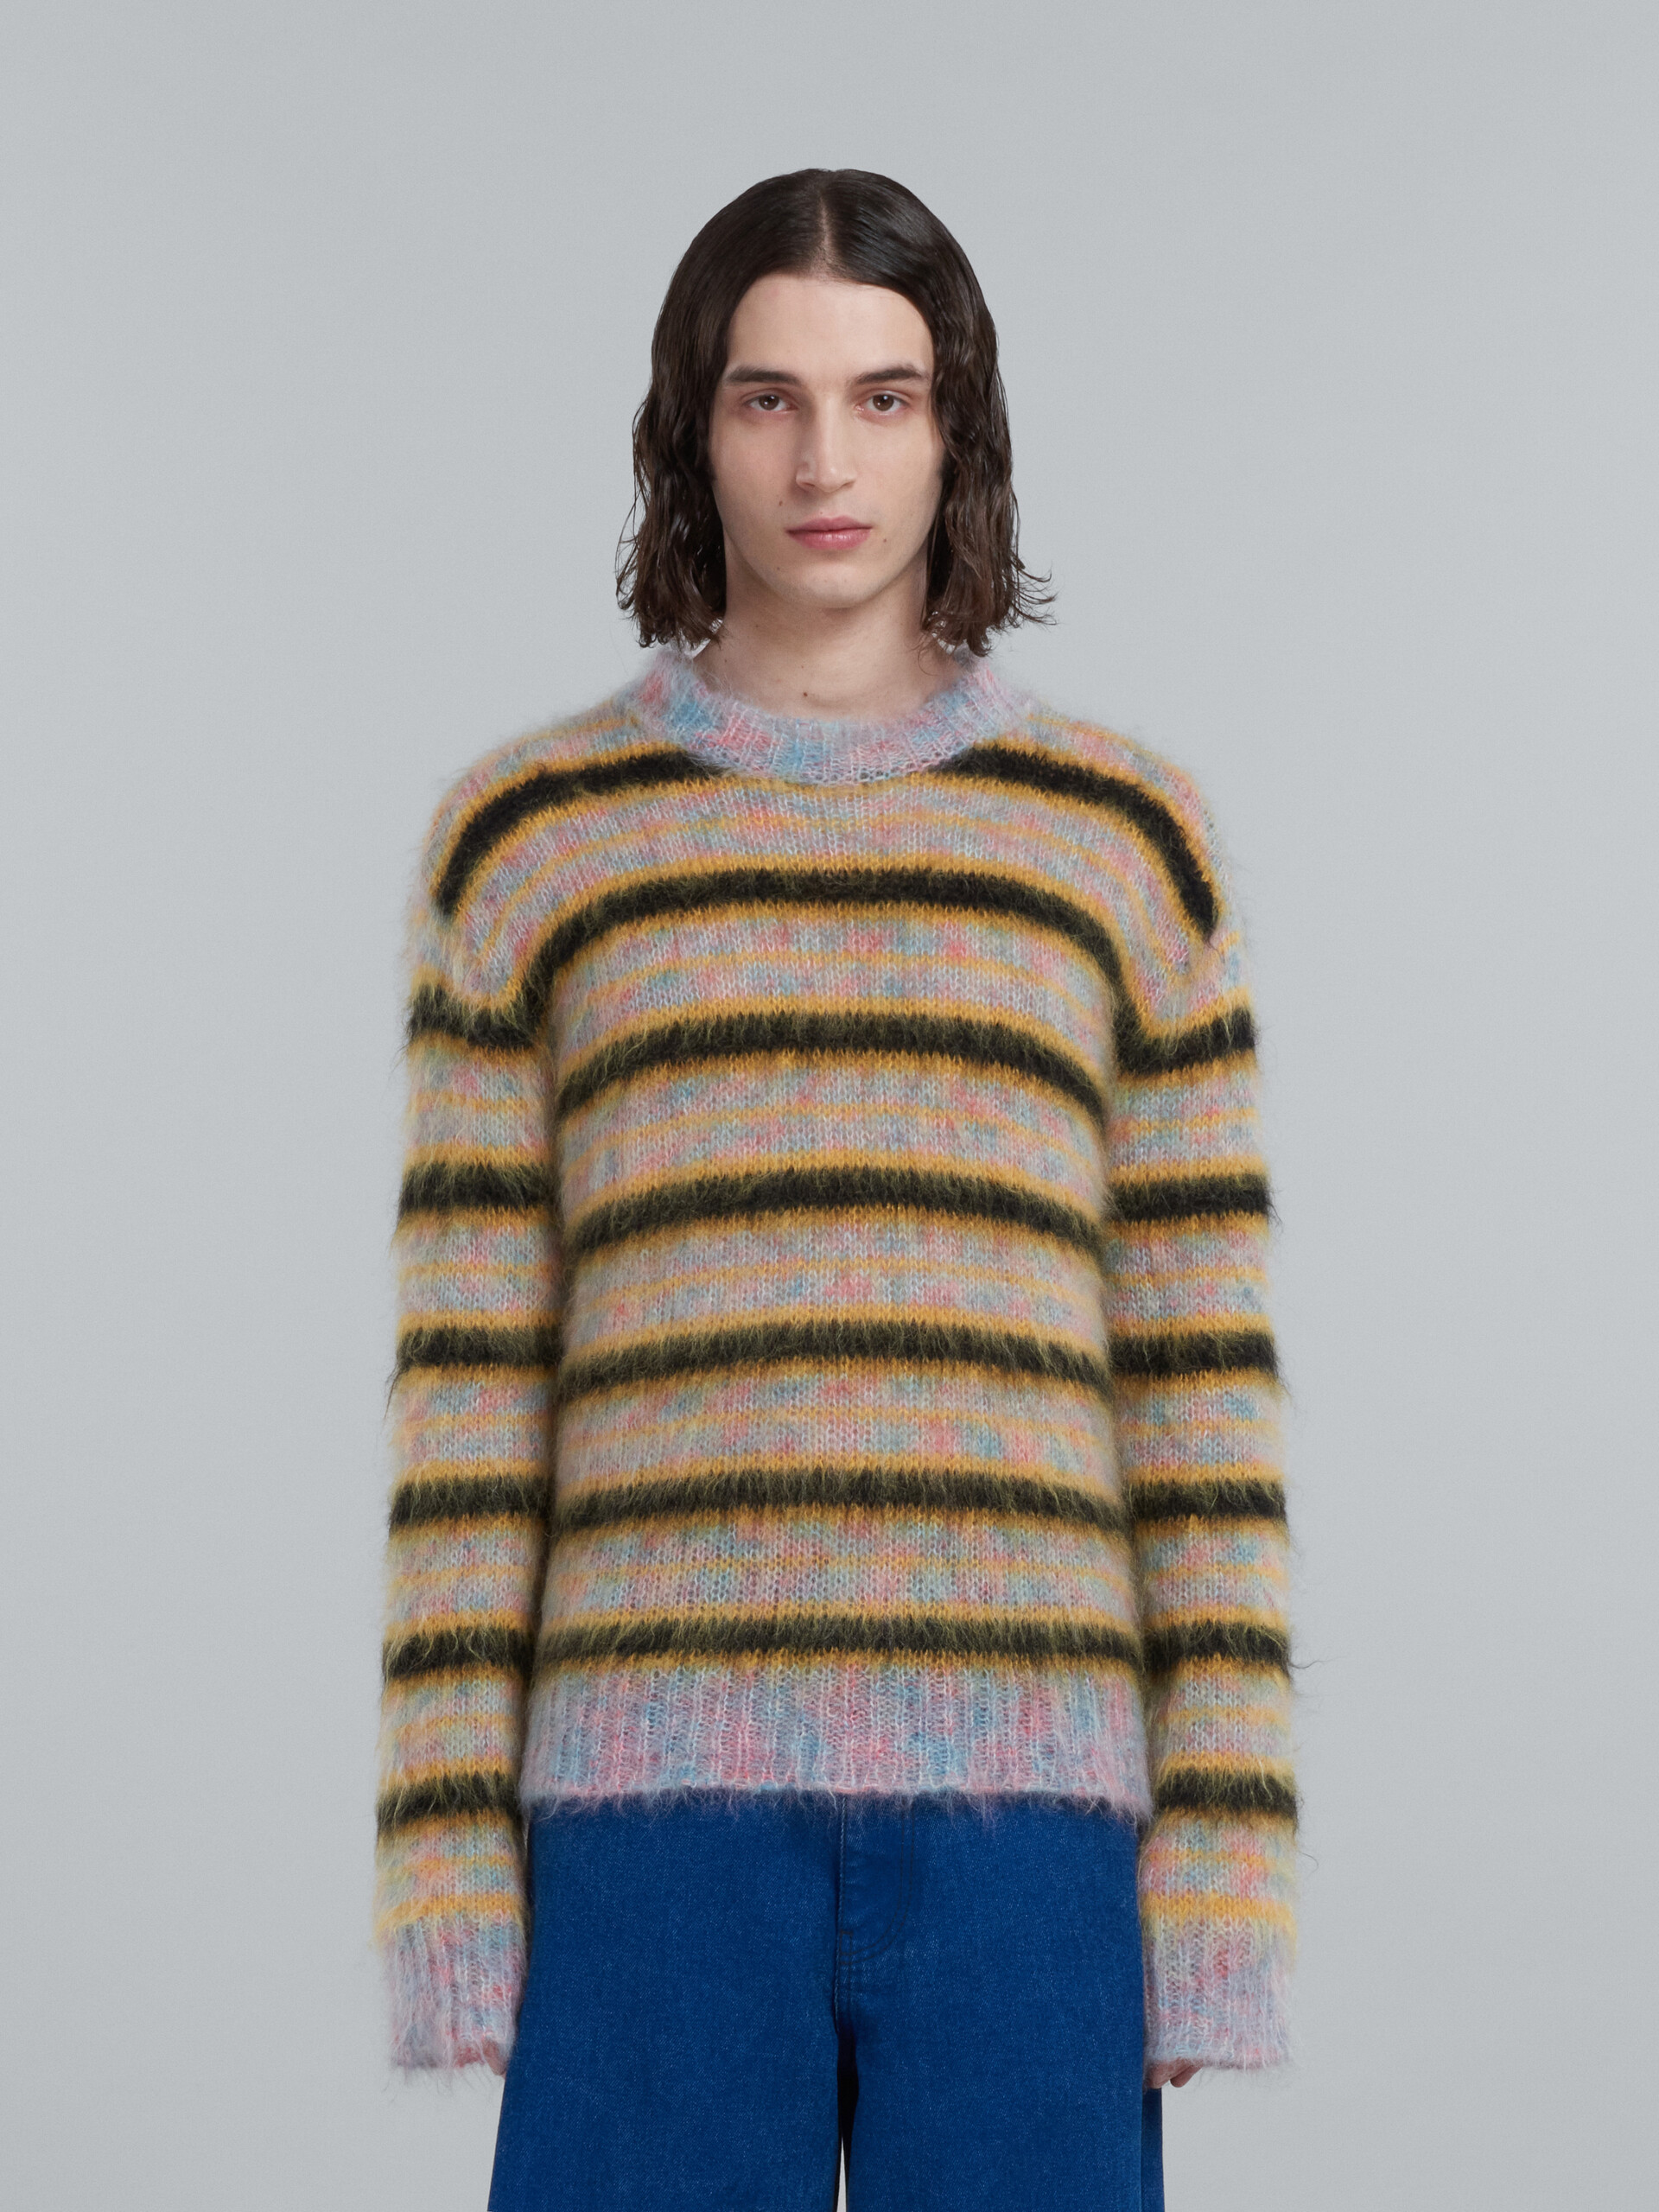 Multicolour striped mohair sweater - Pullovers - Image 2